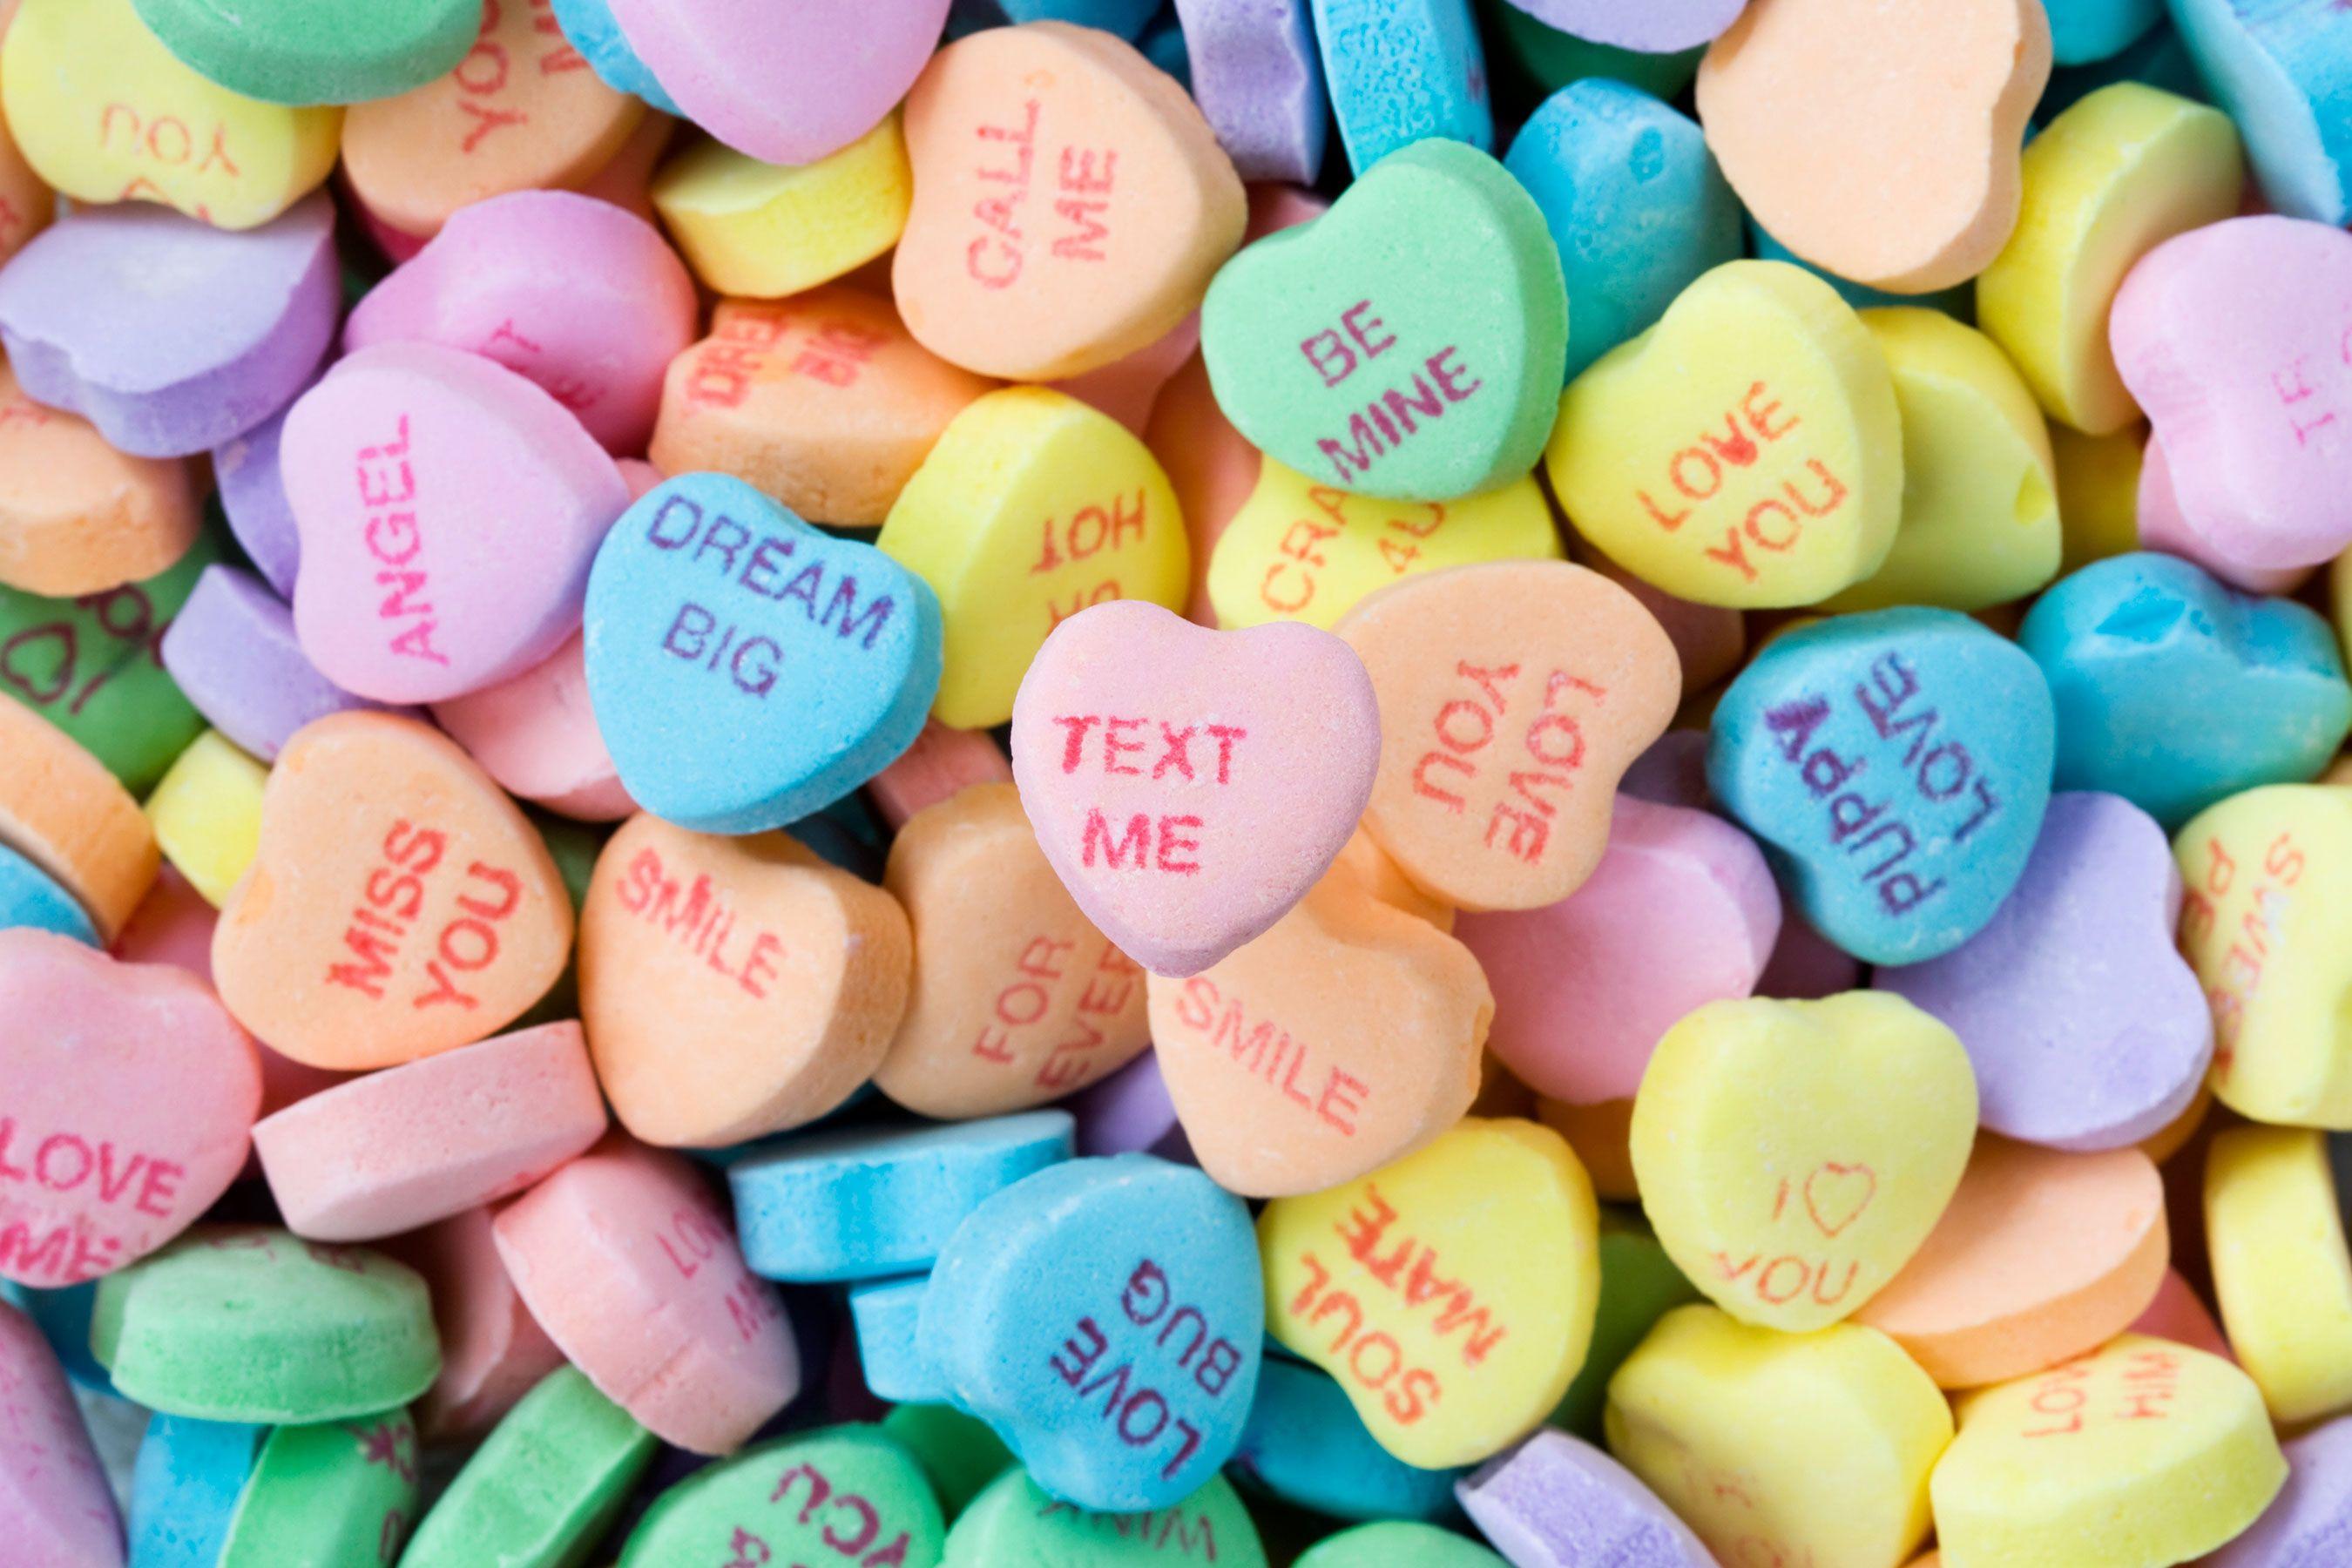 Sweethearts Candy Hearts Are Not Available This Valentine's